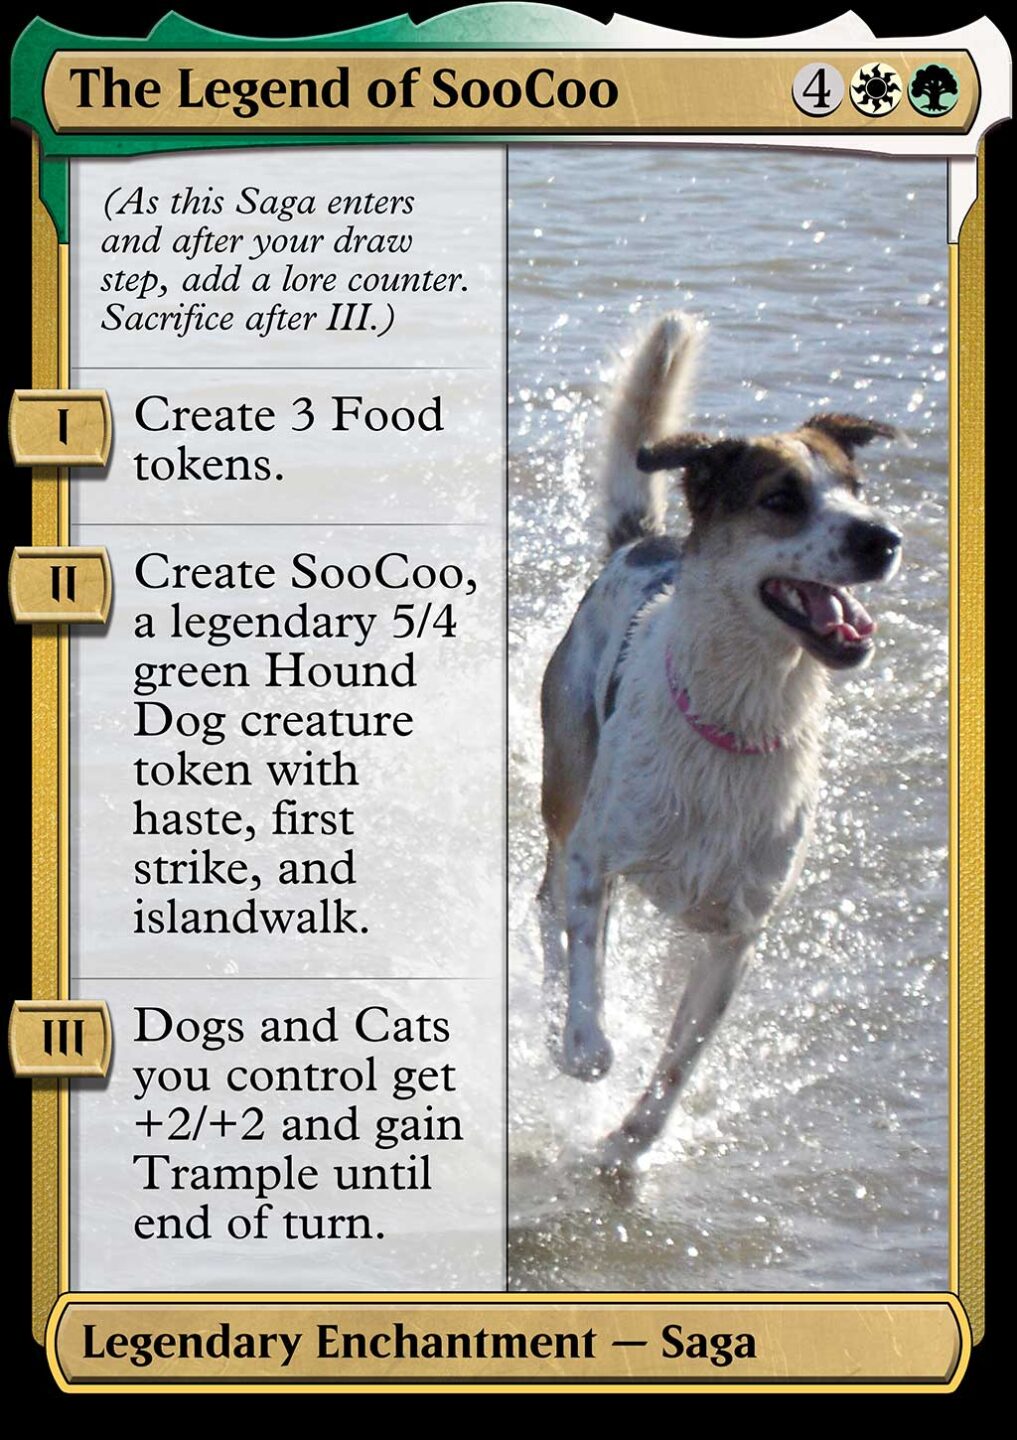 The Legend of SooCoo custom Magic The Gathering card. 4GW Saga. Chapter 1: Create 3 Food tokens. Chapter 2: Create SooCoo, a legendary 5/4 green Hound Dog creature token with haste, first strike, and islandwalk. Chapter 3: Dogs and Cats you control get +2/+2 and gain Trample until end of turn.